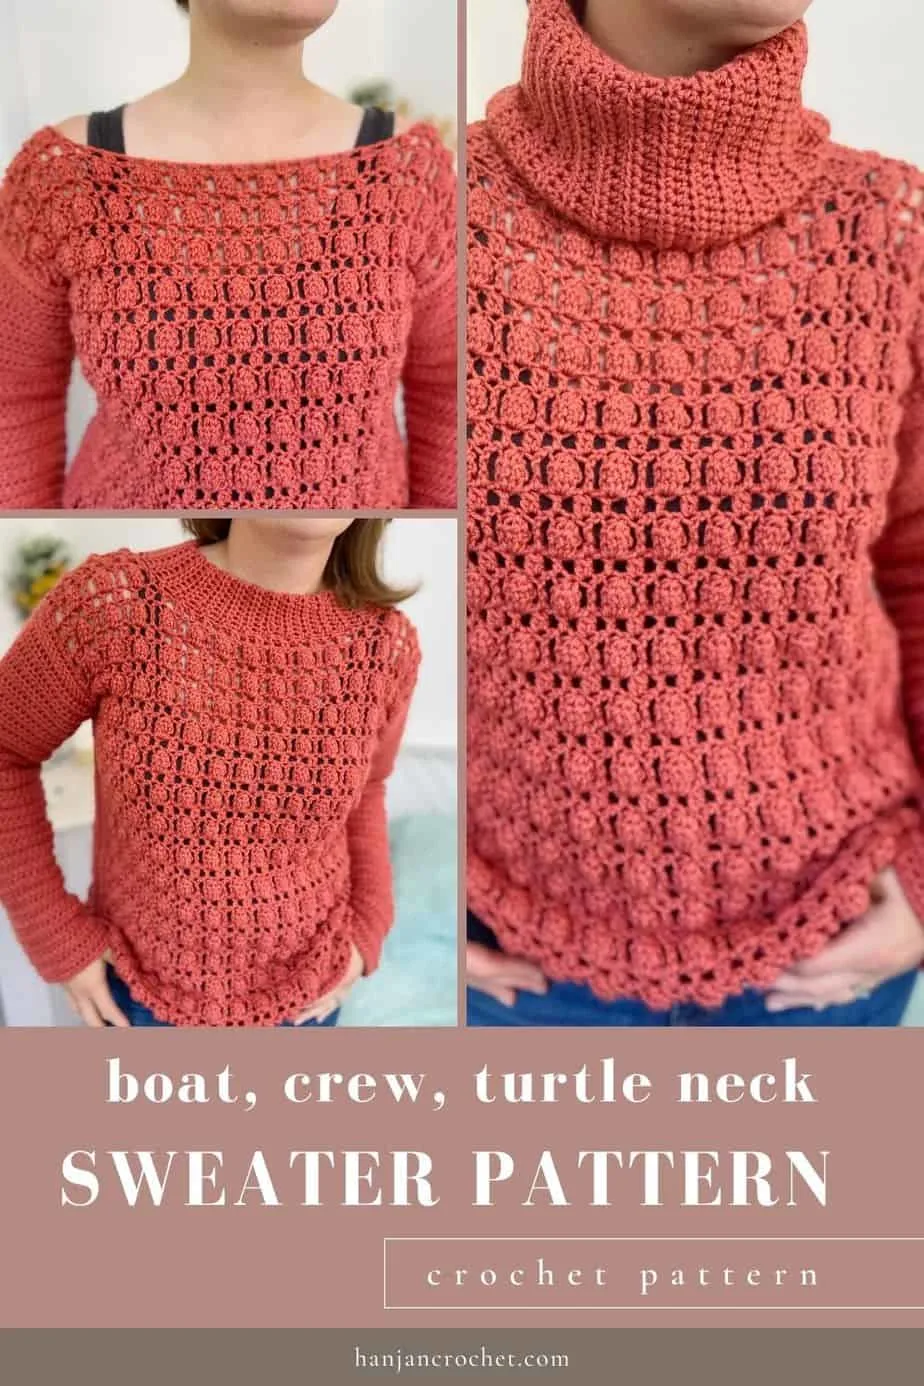 3 images of woman wearing bright coral crochet jumper